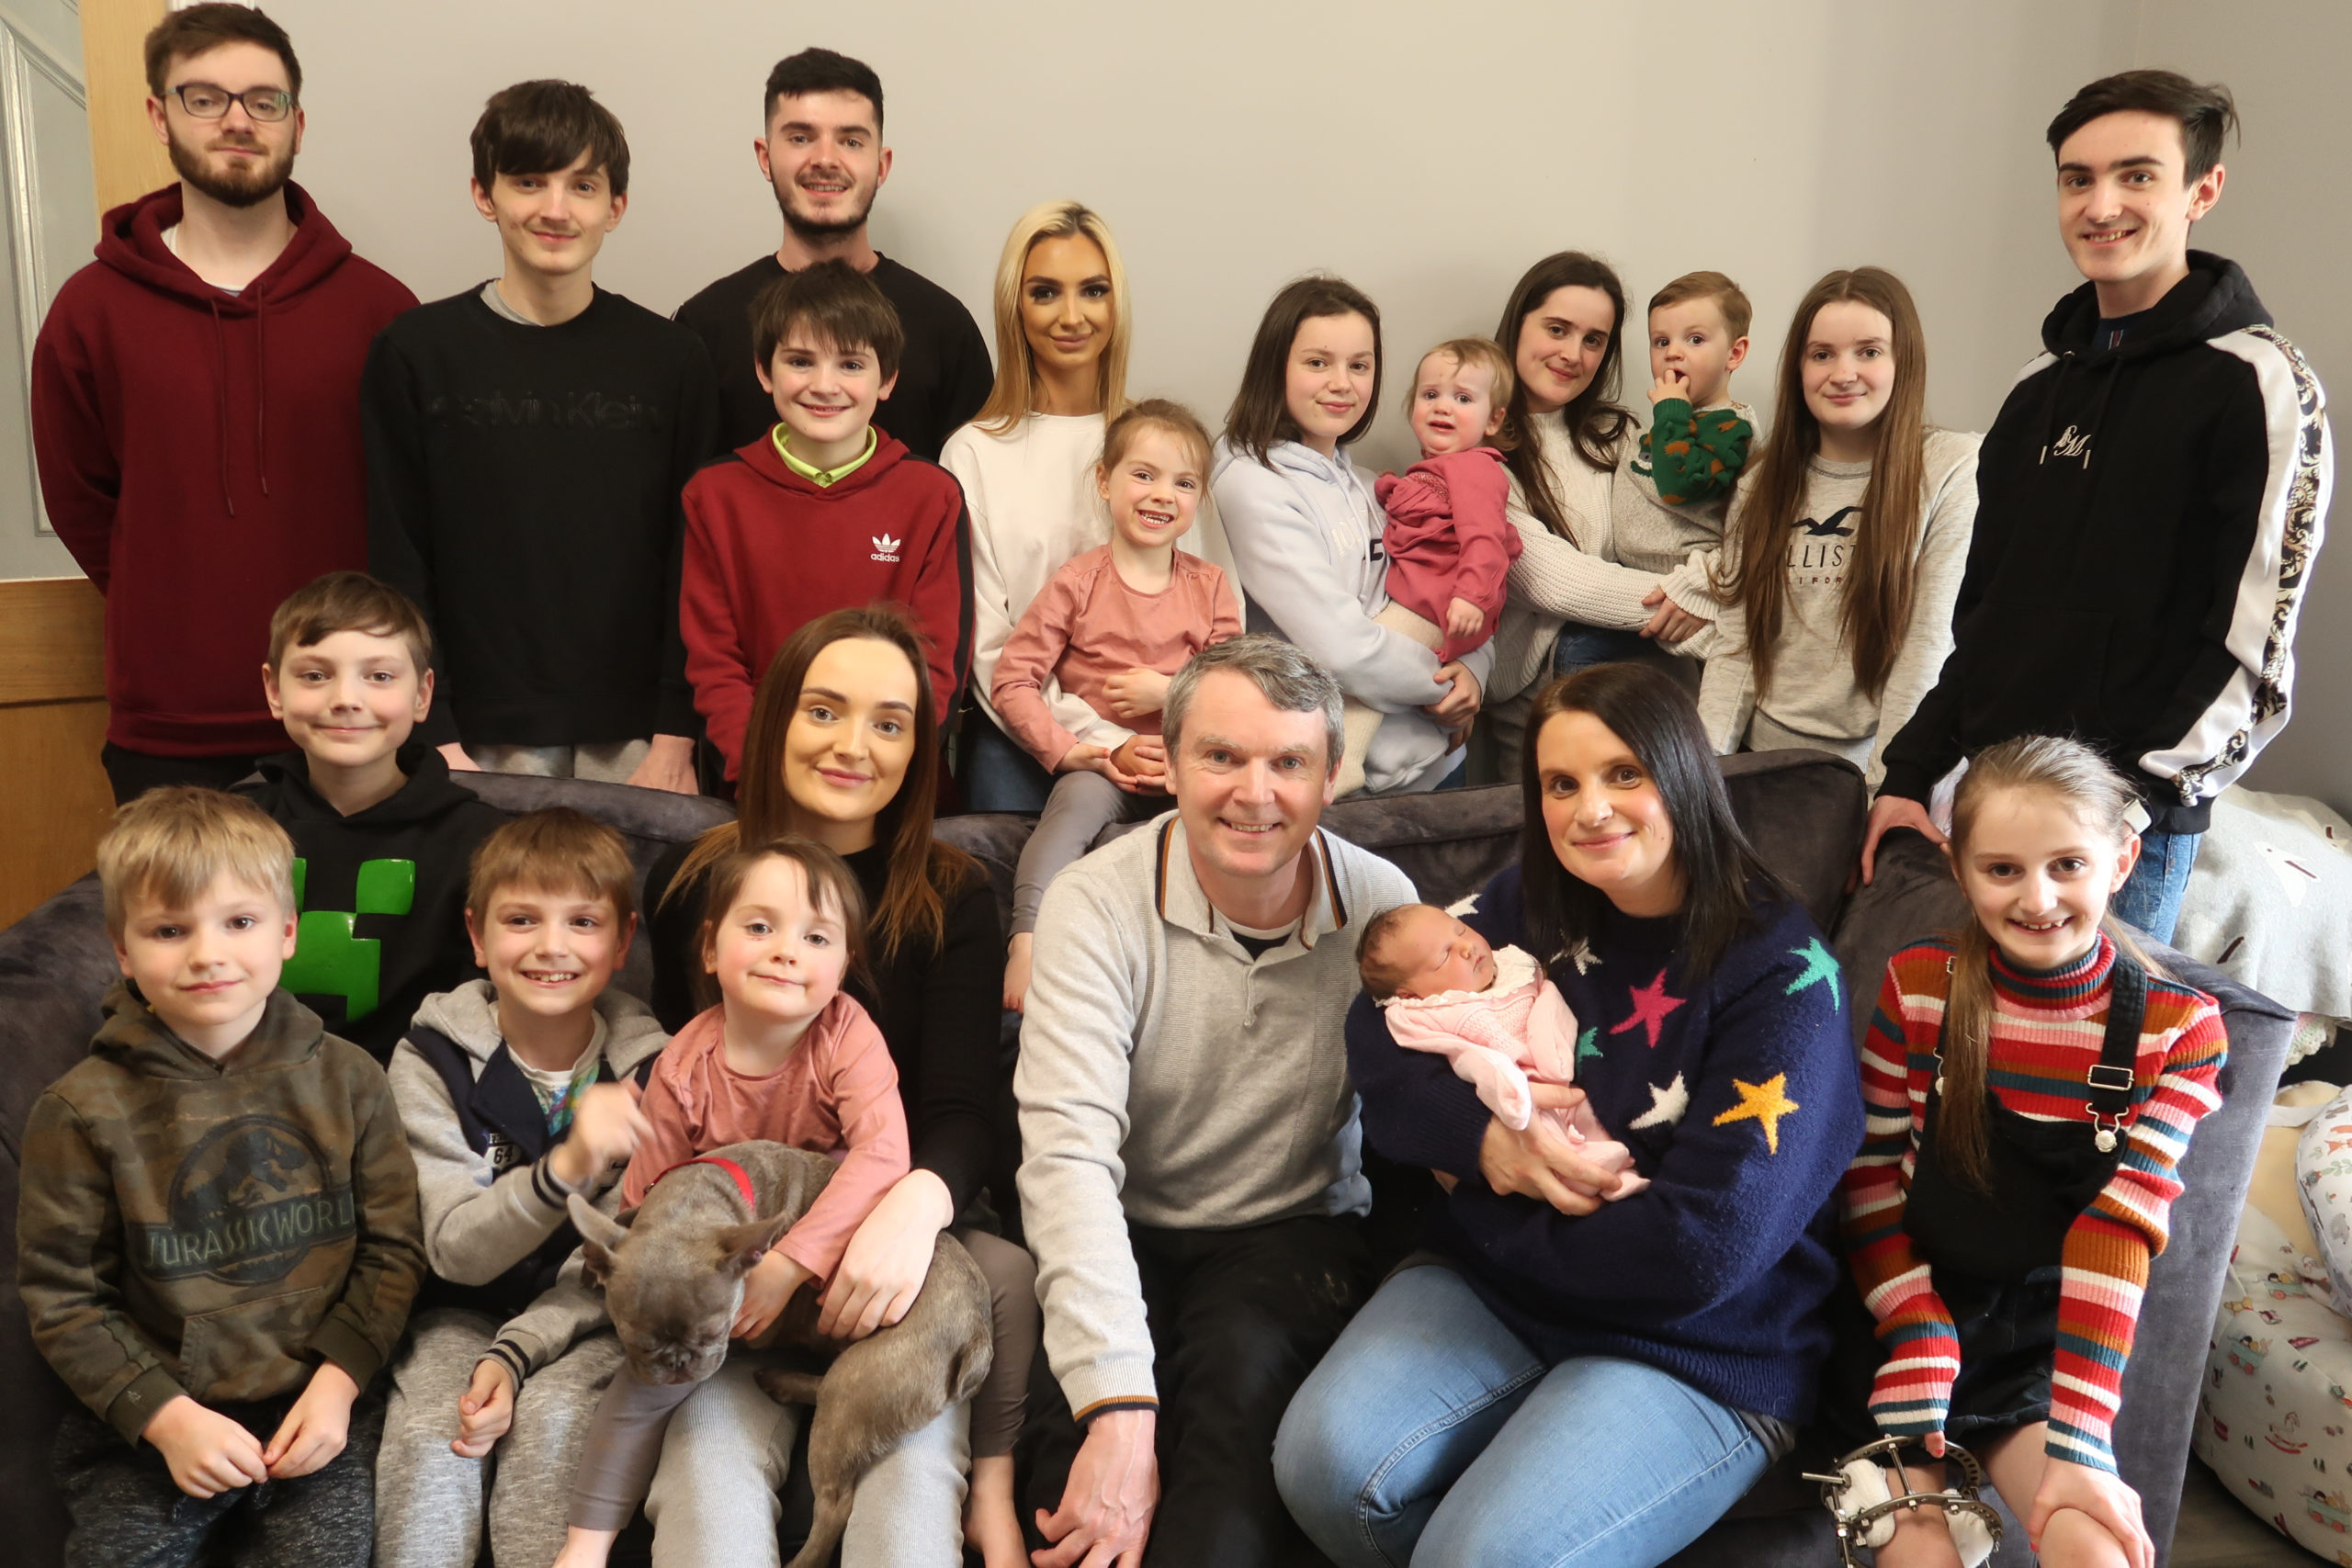 Britain Biggest Family New Revamped Home Tour of With The Mother Of 22 Children!